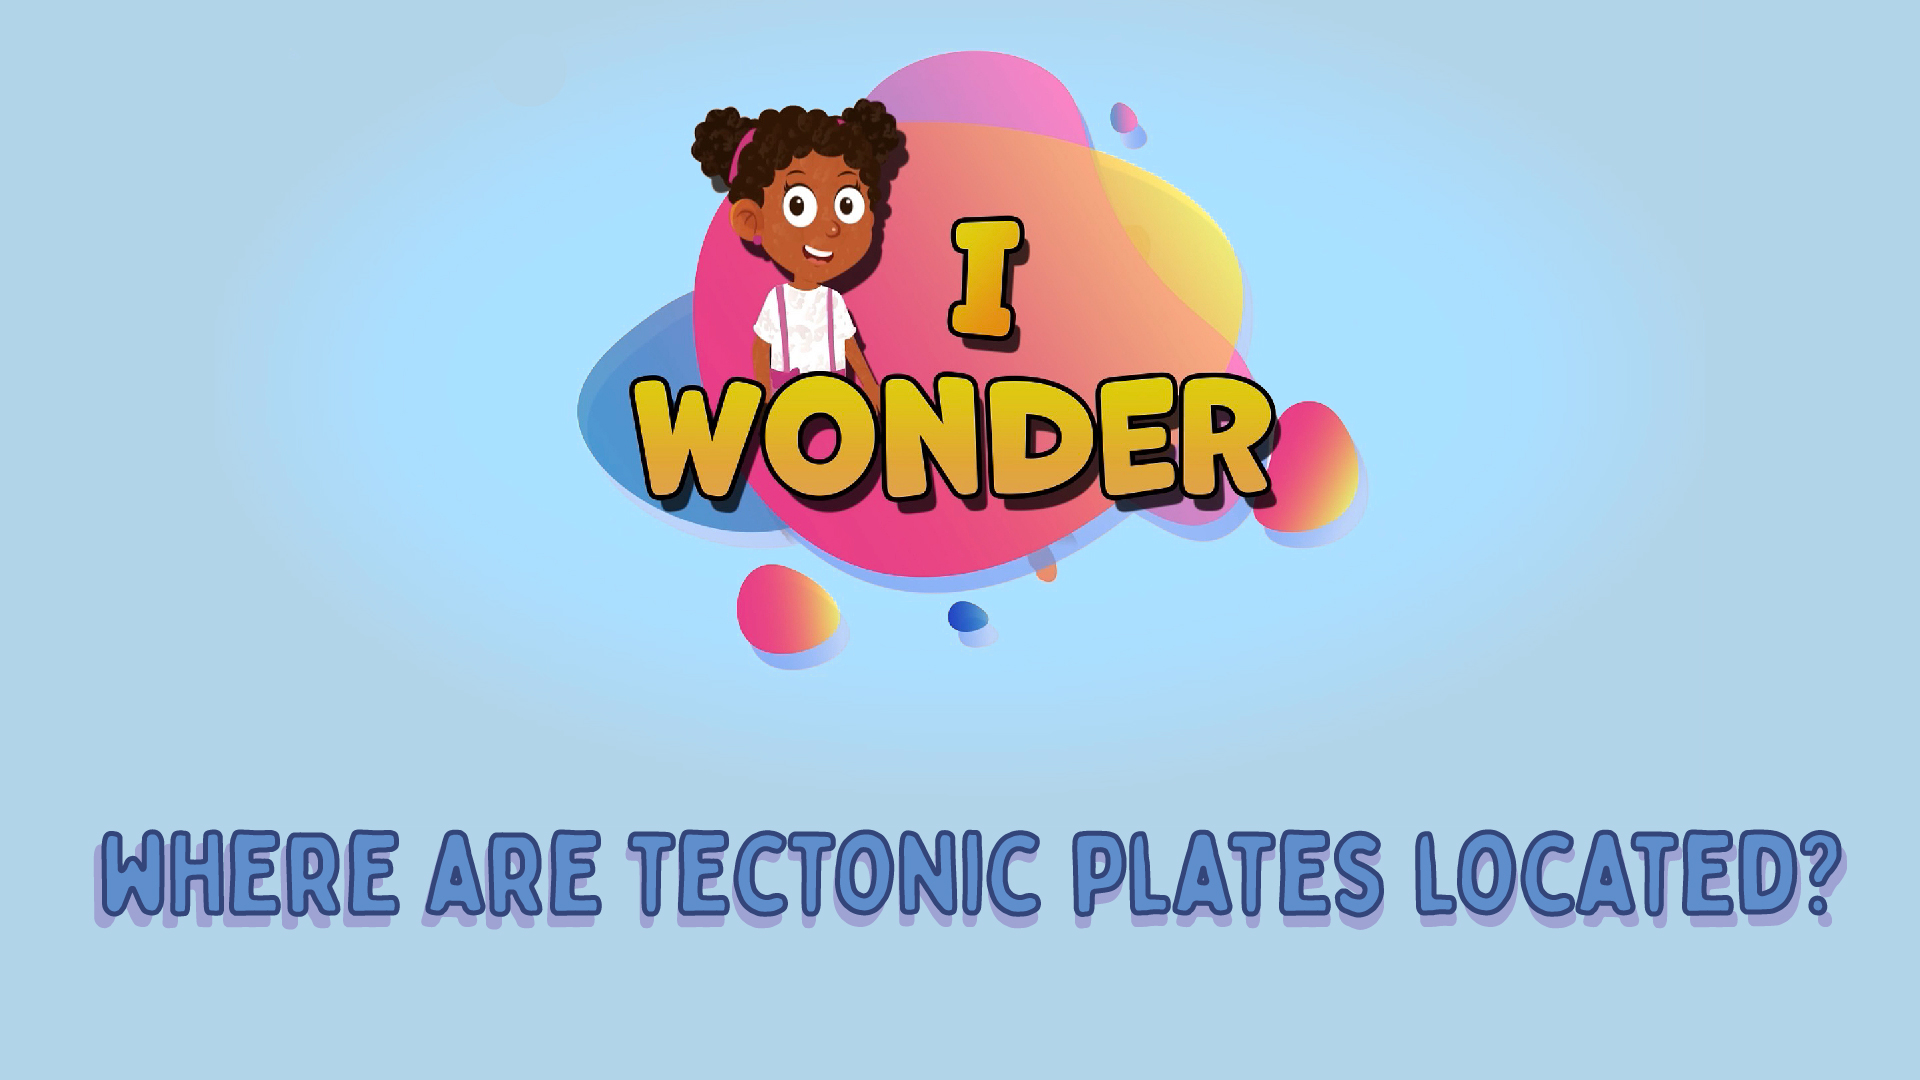 Where Are Tectonic Plates Located?